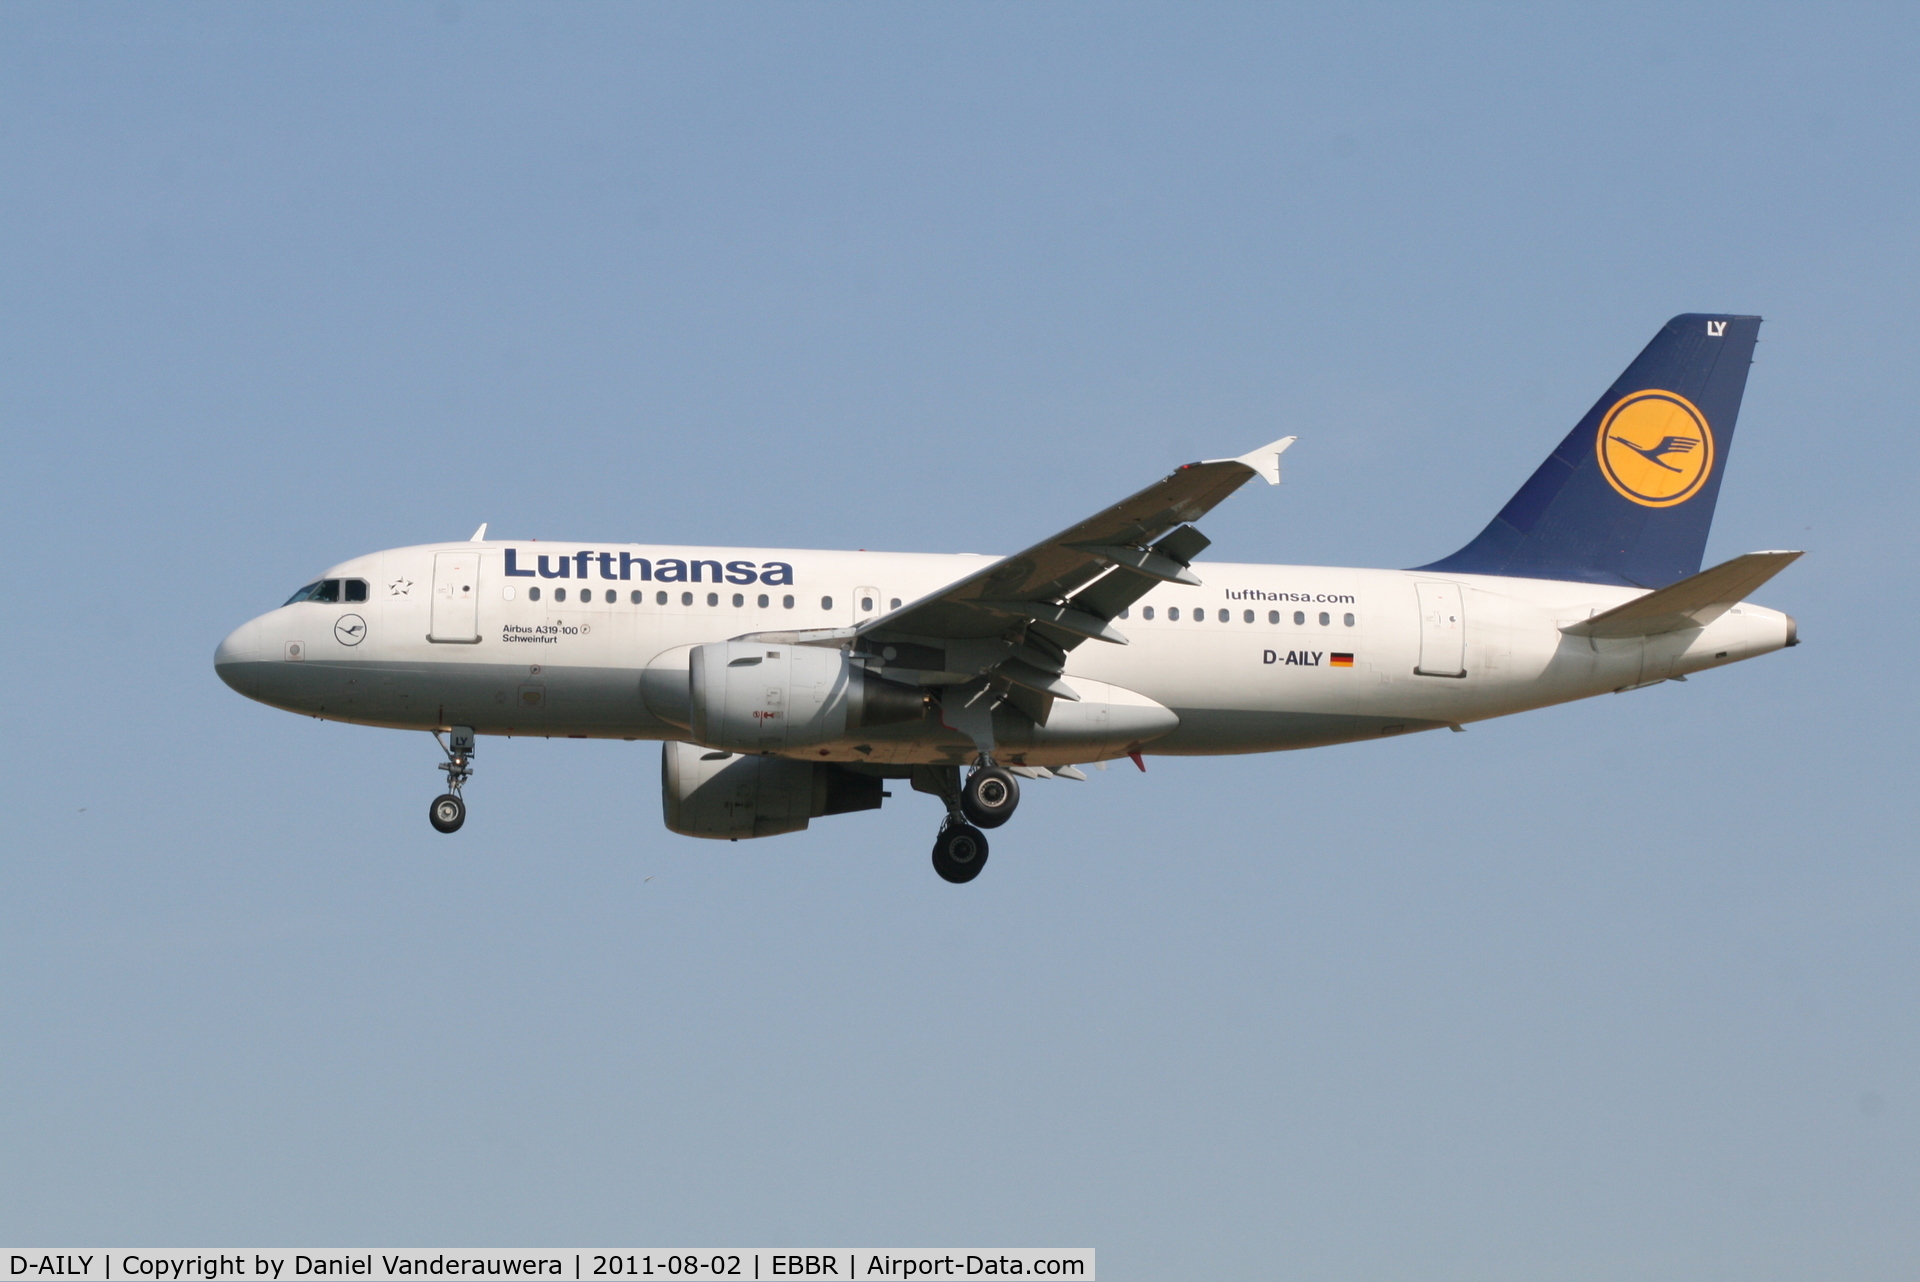 D-AILY, 1998 Airbus A319-114 C/N 875, Arrival of flight LH2284 to RWY 25L